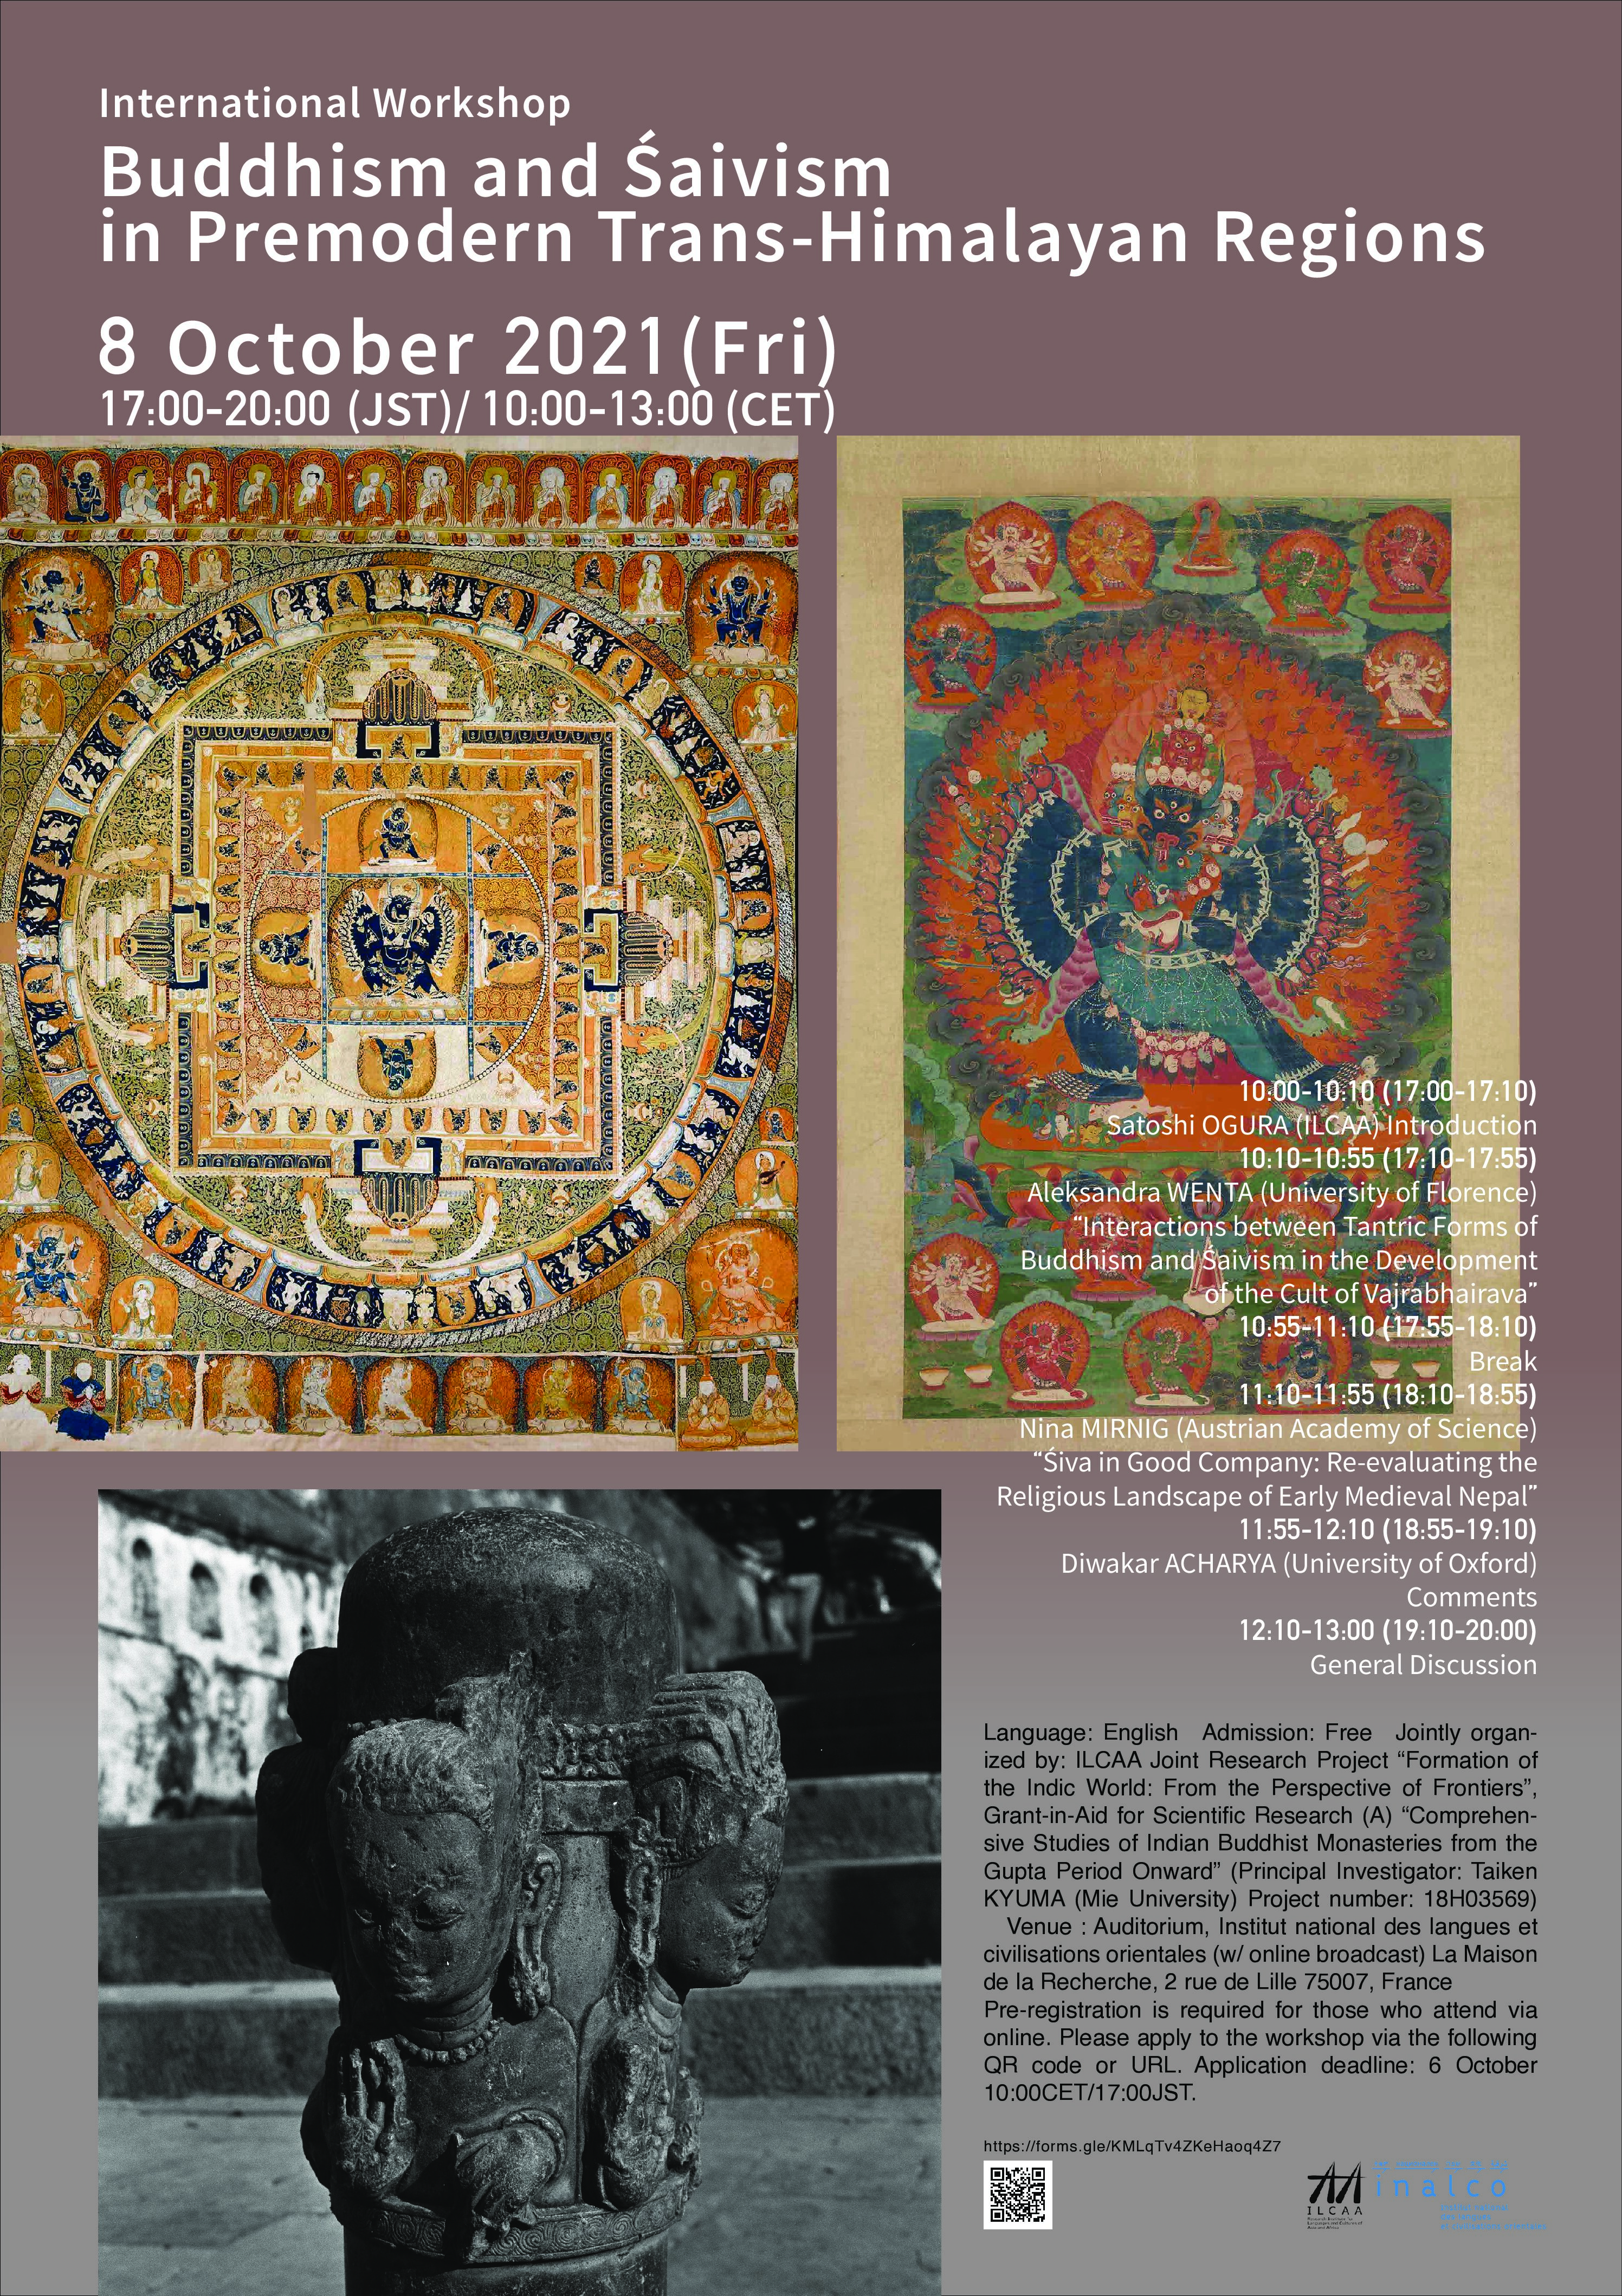 “Buddhism and Śaivism in Premodern Trans-Himalayan Regions” – 8/10